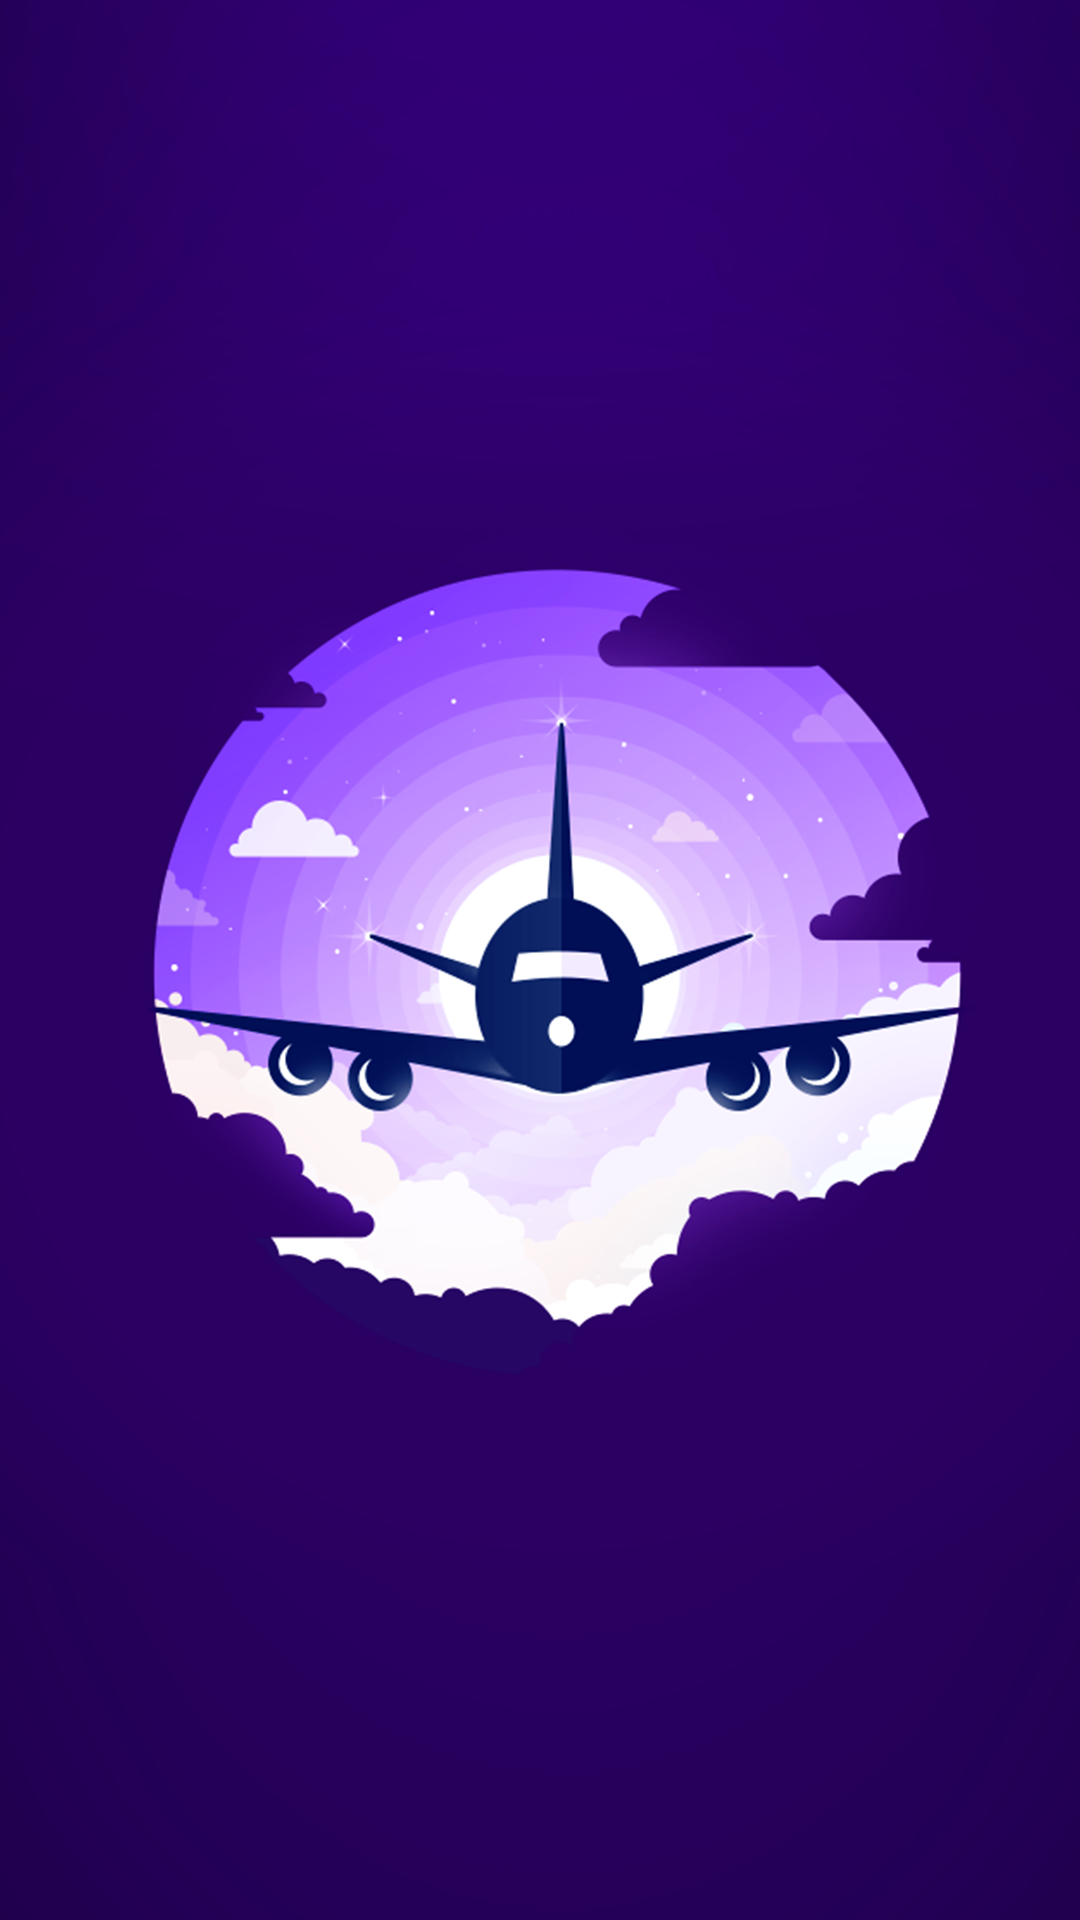 General 1080x1920 material style minimalism aircraft purple background